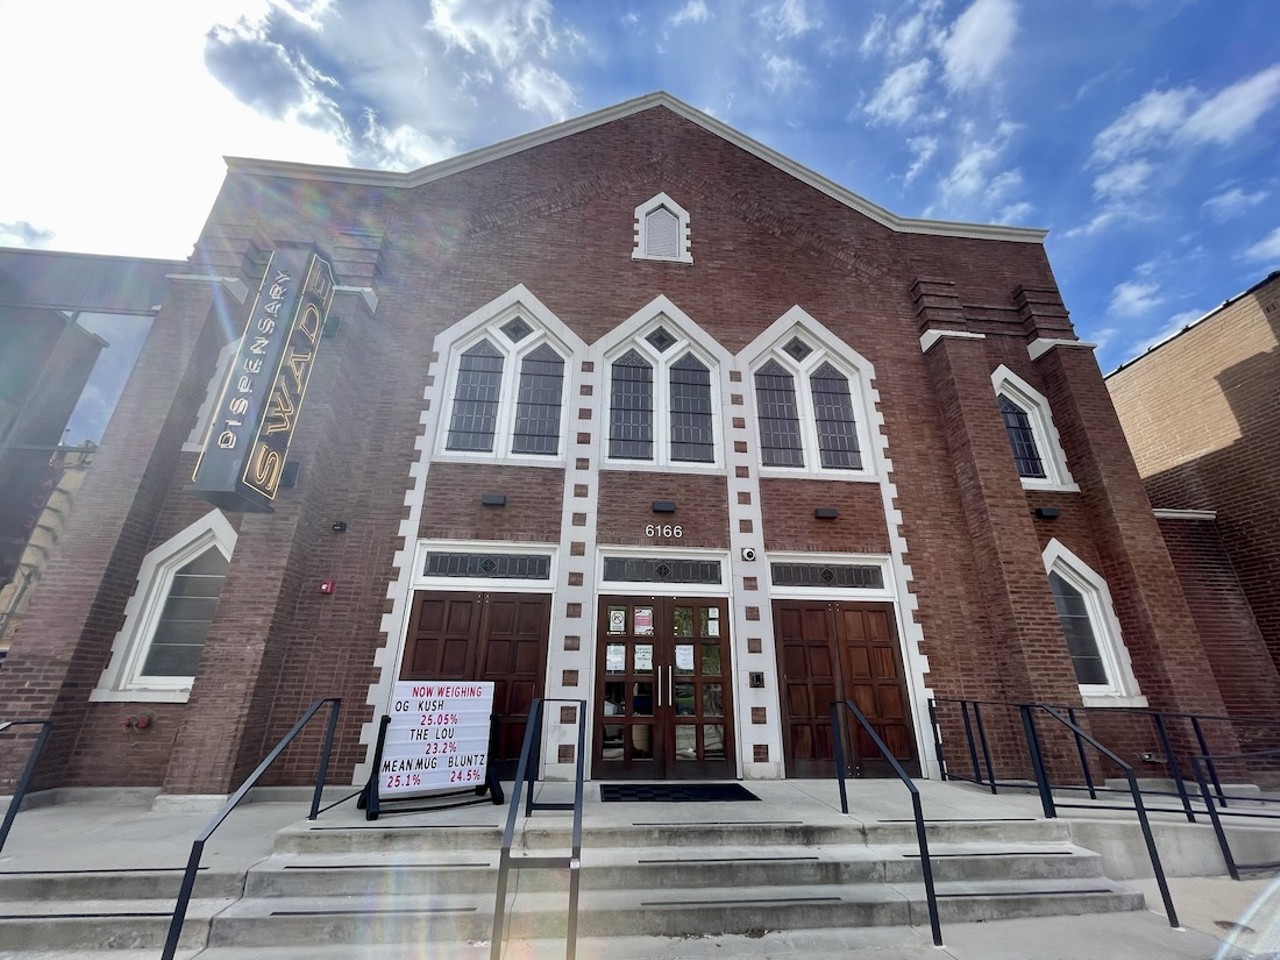 
Those who prefer their cannabis peddled from a former house of worship will want to head to the church building next door and check out Swade Cannabis (6166 Delmar Boulevard). Come for the weed, stay for the multiple photos of Joe Edwards posing with Cheech and Chong in the building's lobby. 
